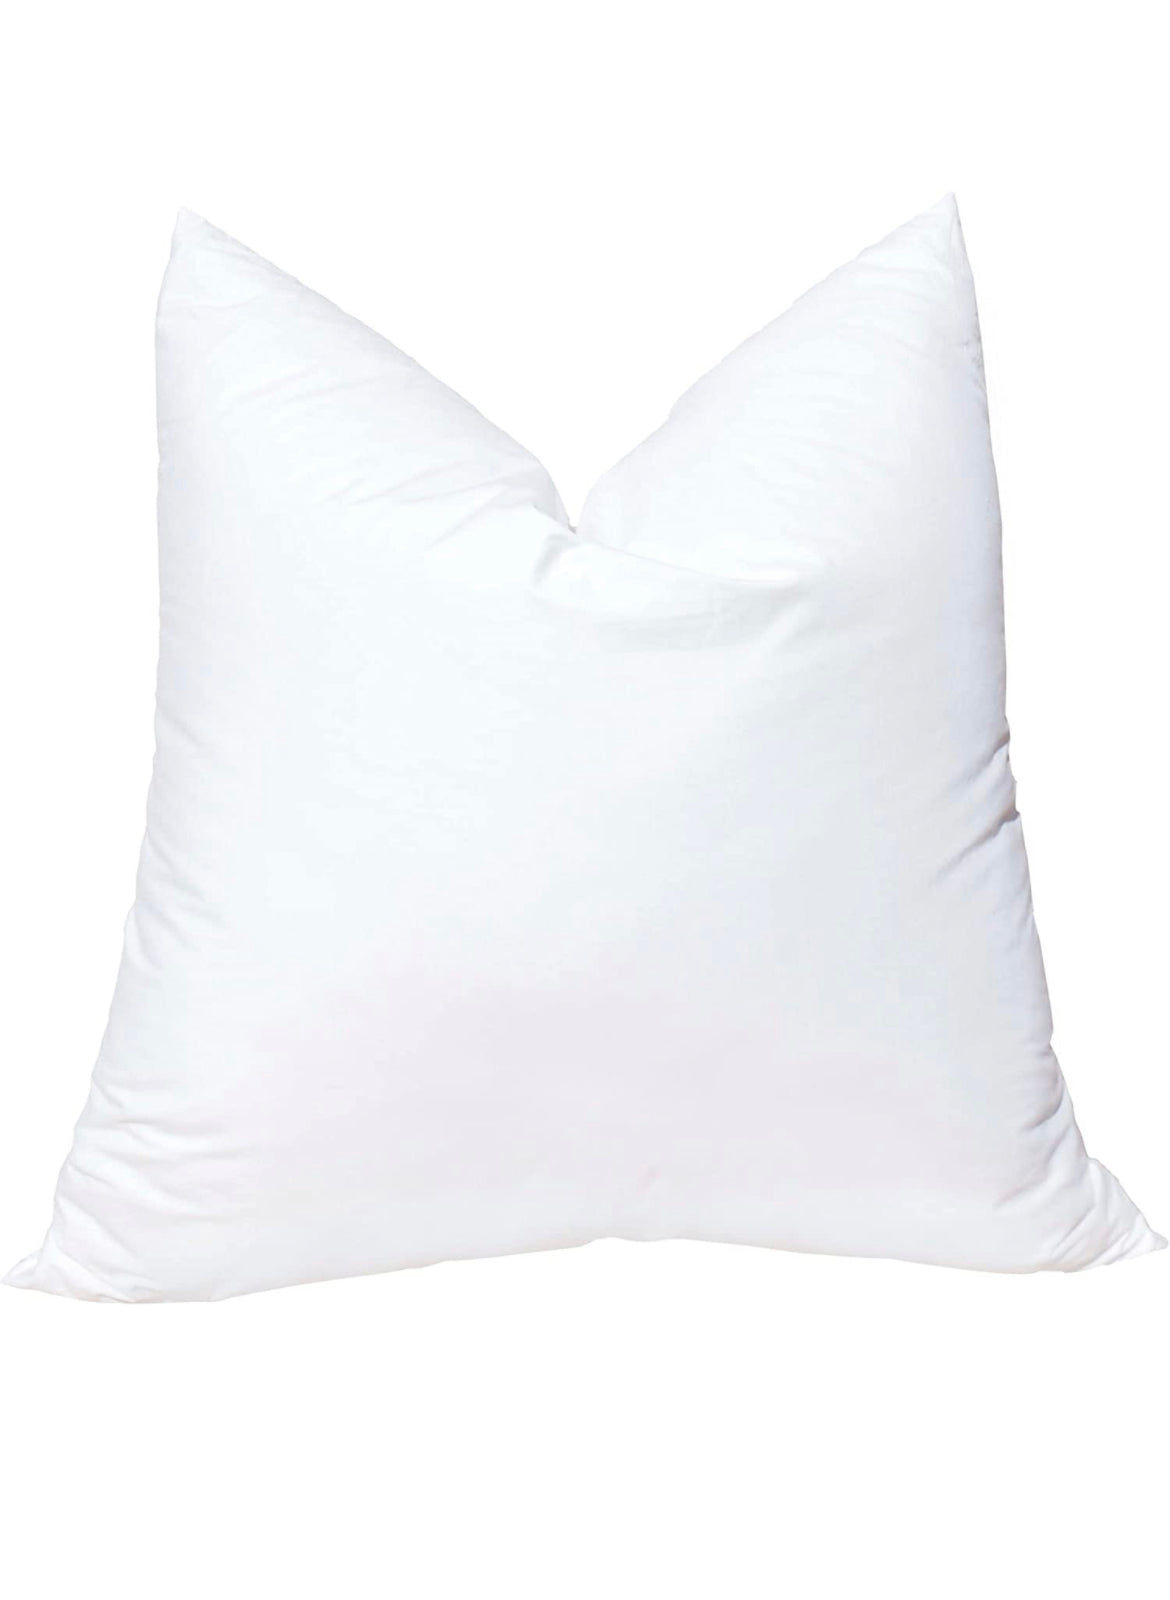 Luxury Hypoallergenic Inserts For Pillow Covers